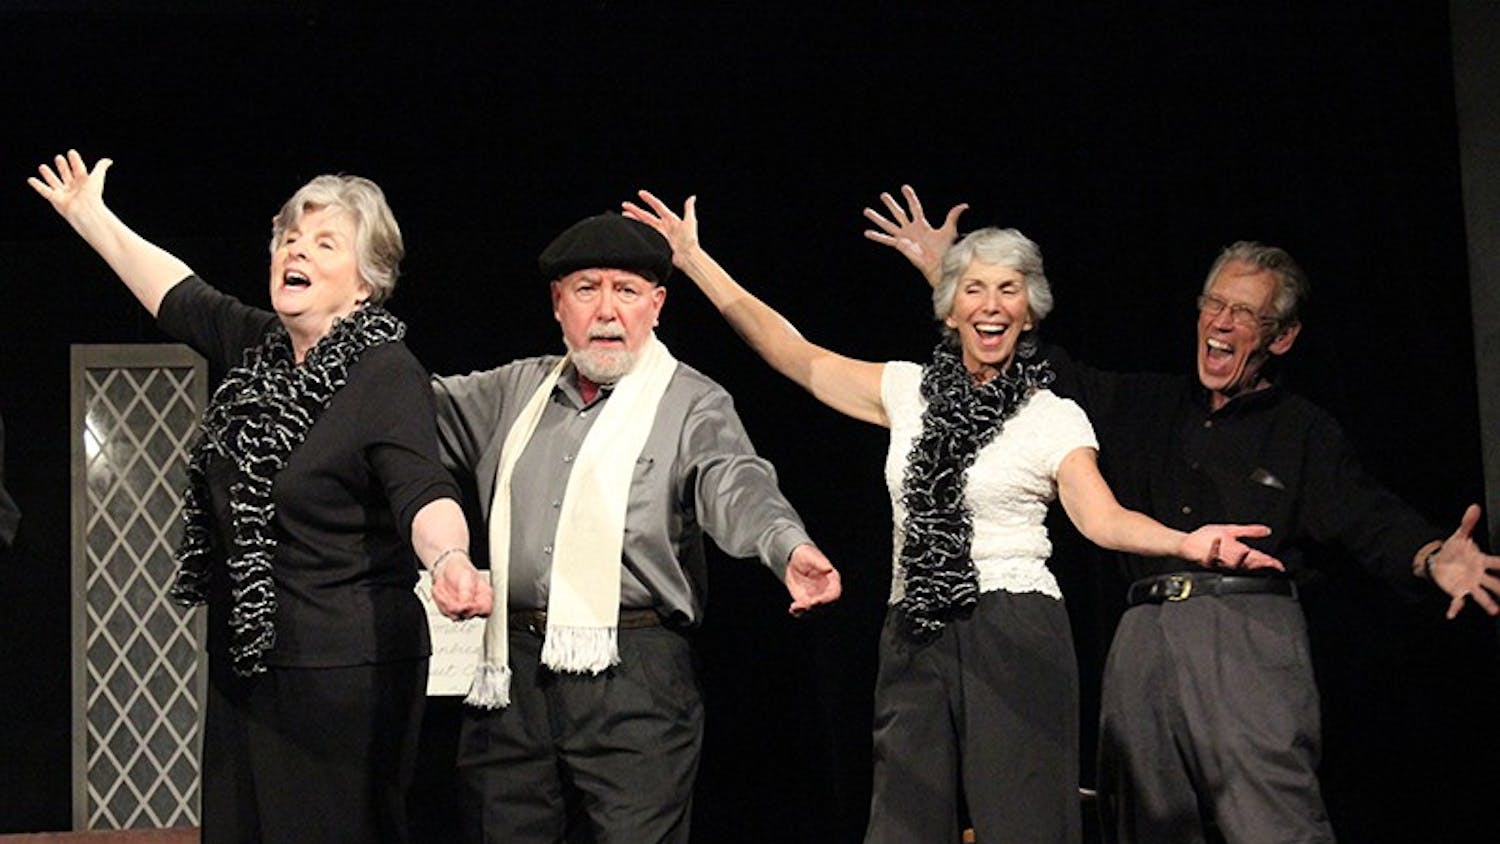 Carol Oleson, Herbert Gross, Naomi Eckhaus and Paul Stiller of StAGE It! rehearse "The Perfect Day," their new "elder" musical, at The Arts Center in Carrboro Thursday evening.